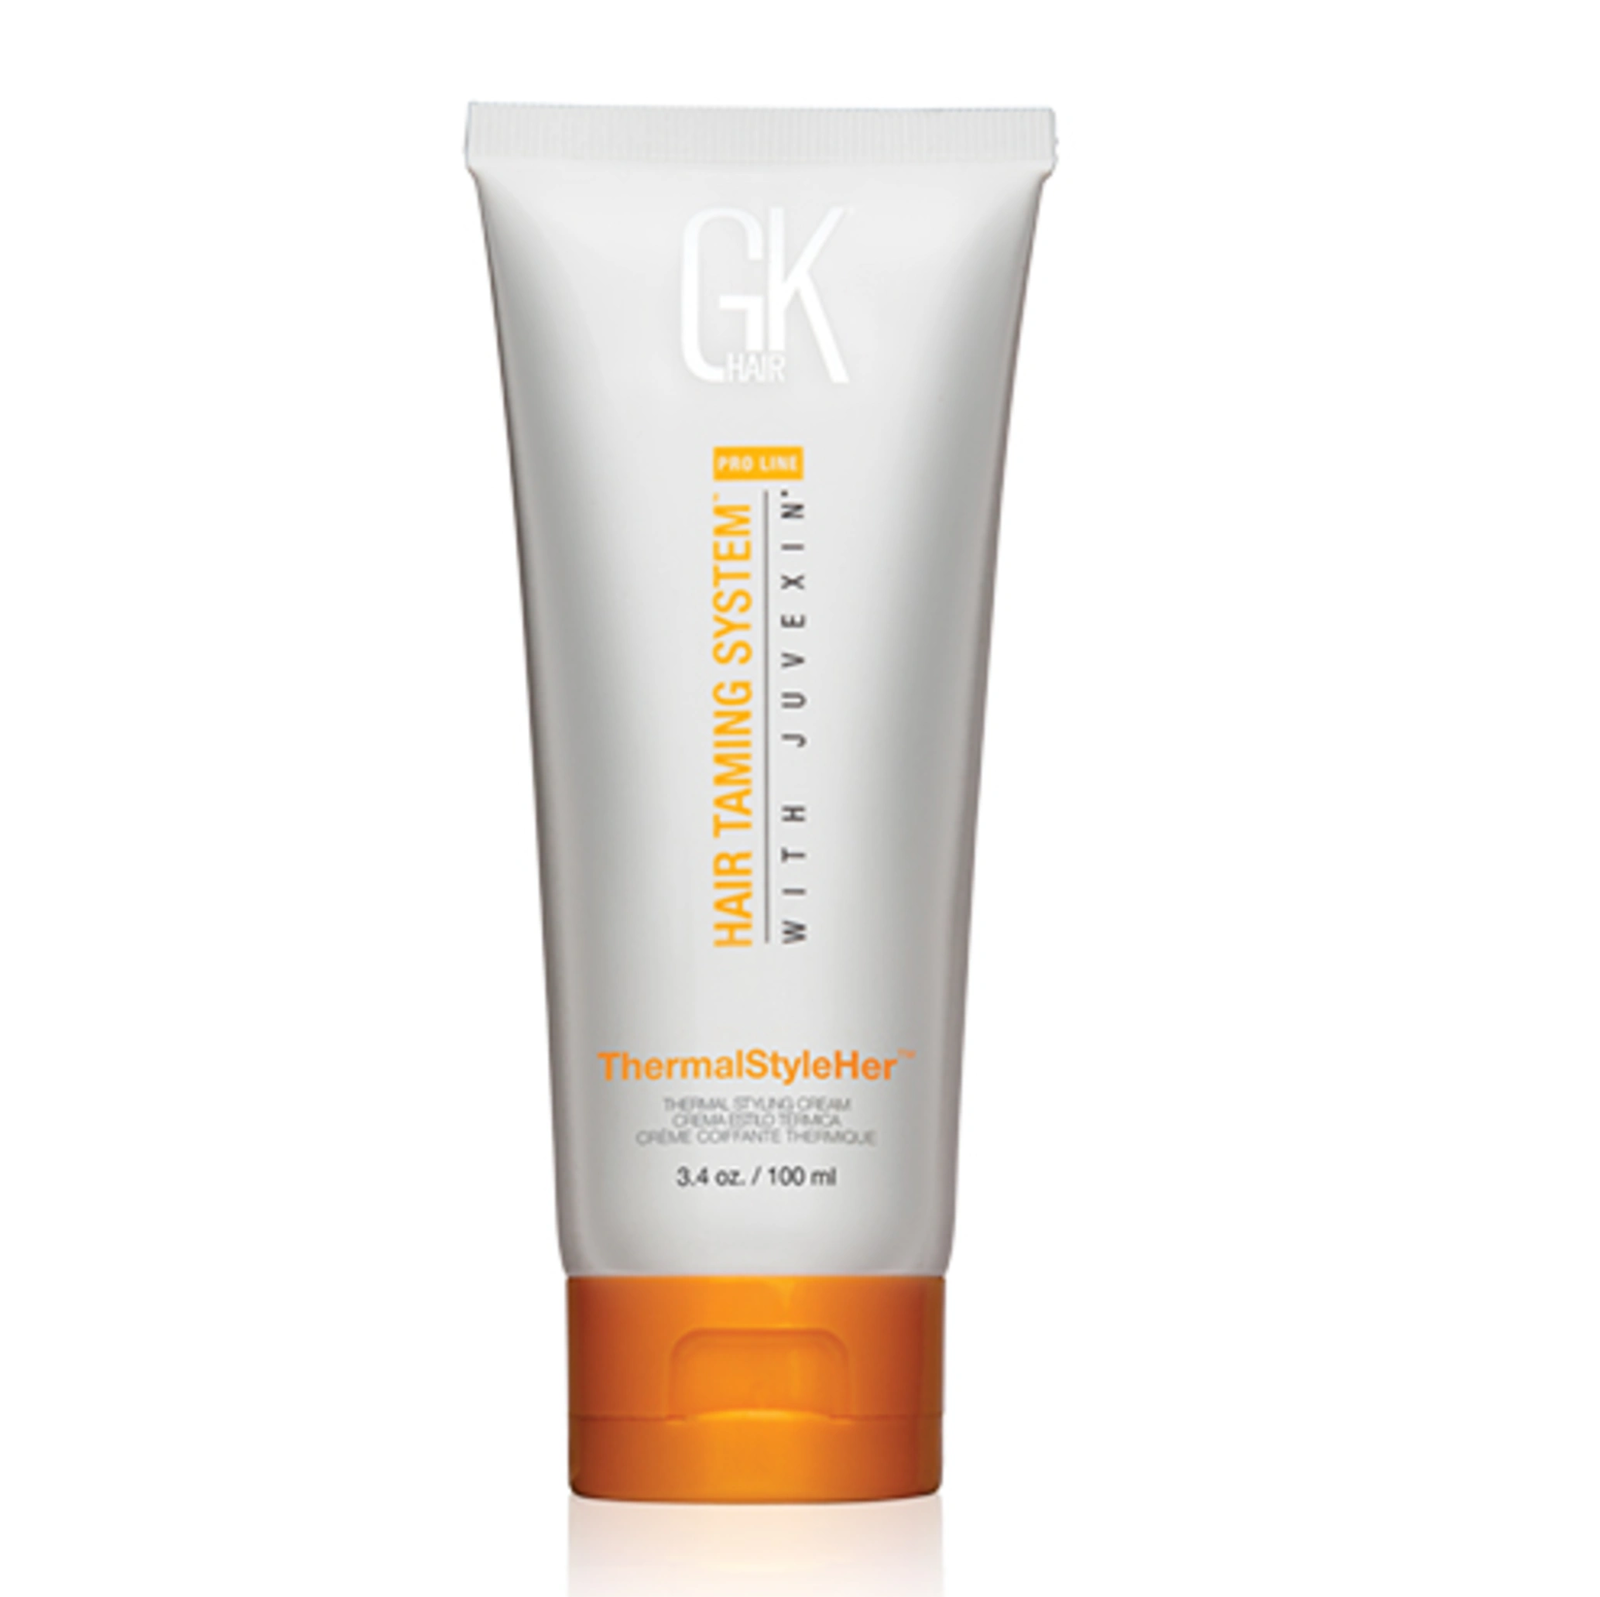 GK Thermal Style Her Cream, 3.4 Oz. - $22.00